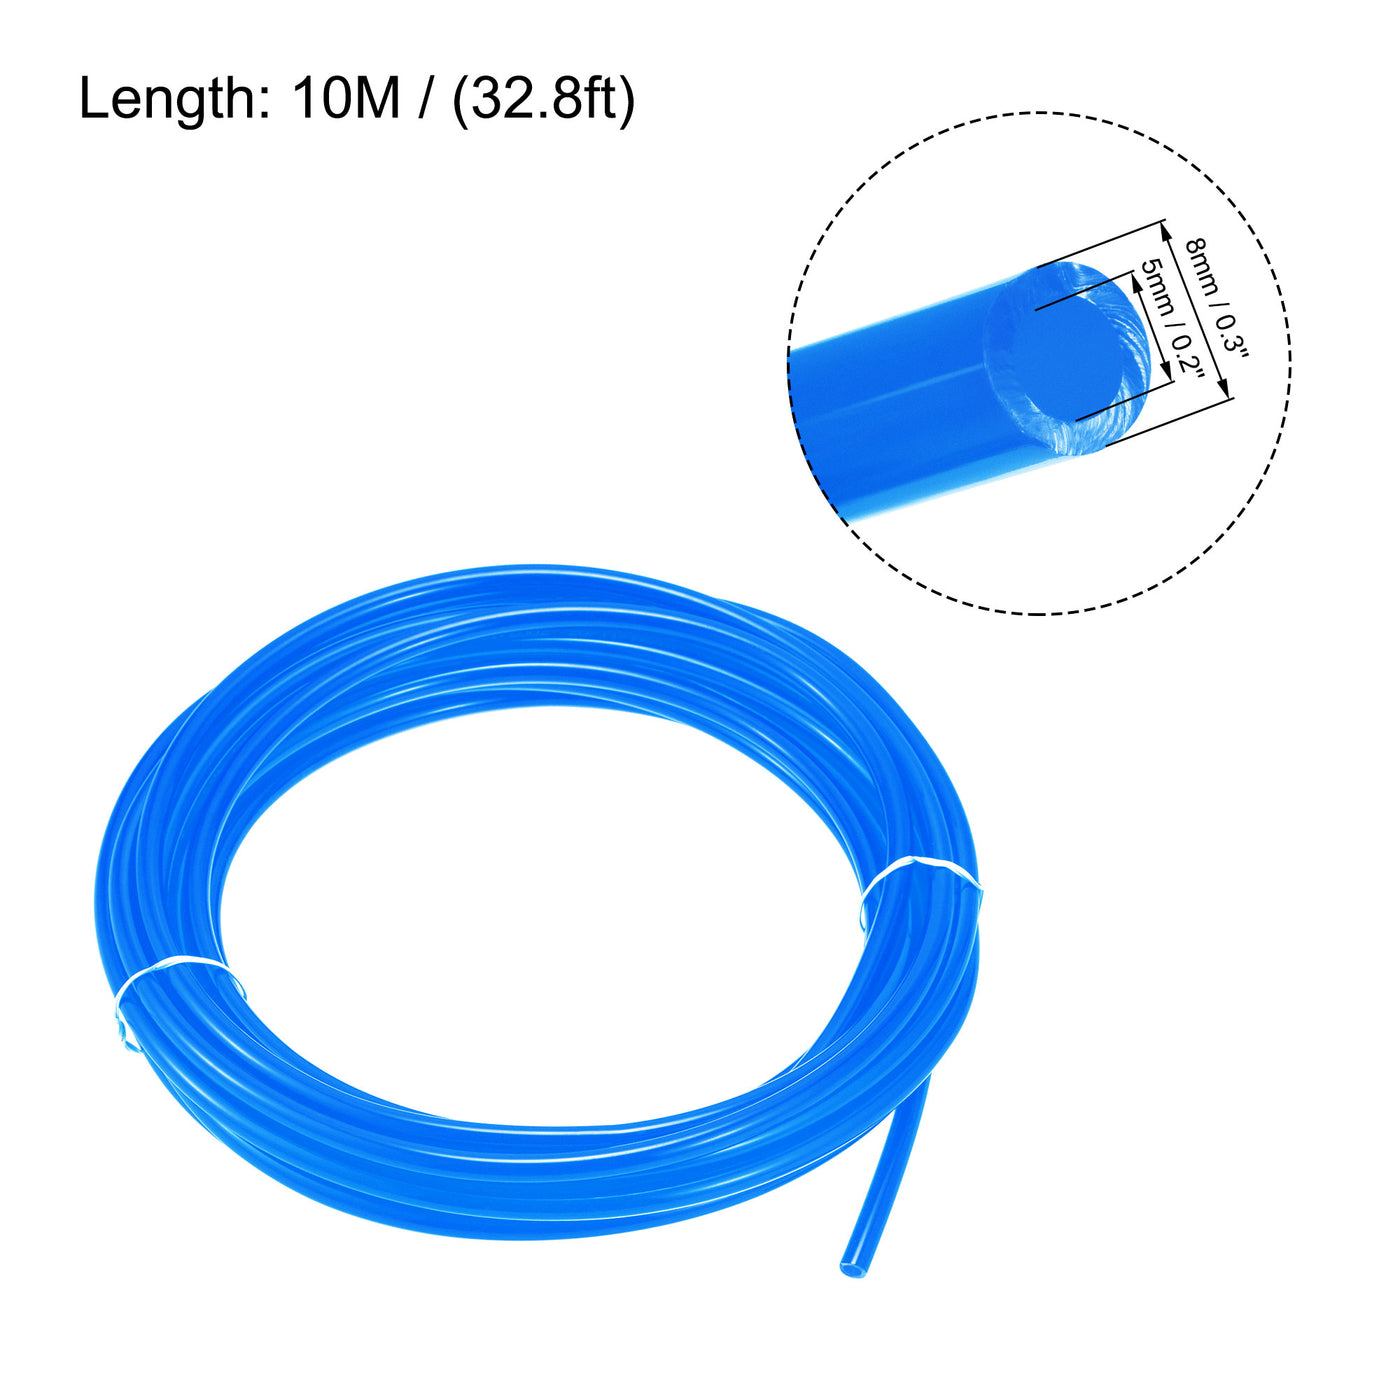 uxcell Uxcell Pneumatic Air Hose Tubing PU Air Compressor Tube 5mm/0.2''IDx8mm/0.3''ODx10m/32.8Ft Polyurethane Pipe Blue with Threaded Connect Kit